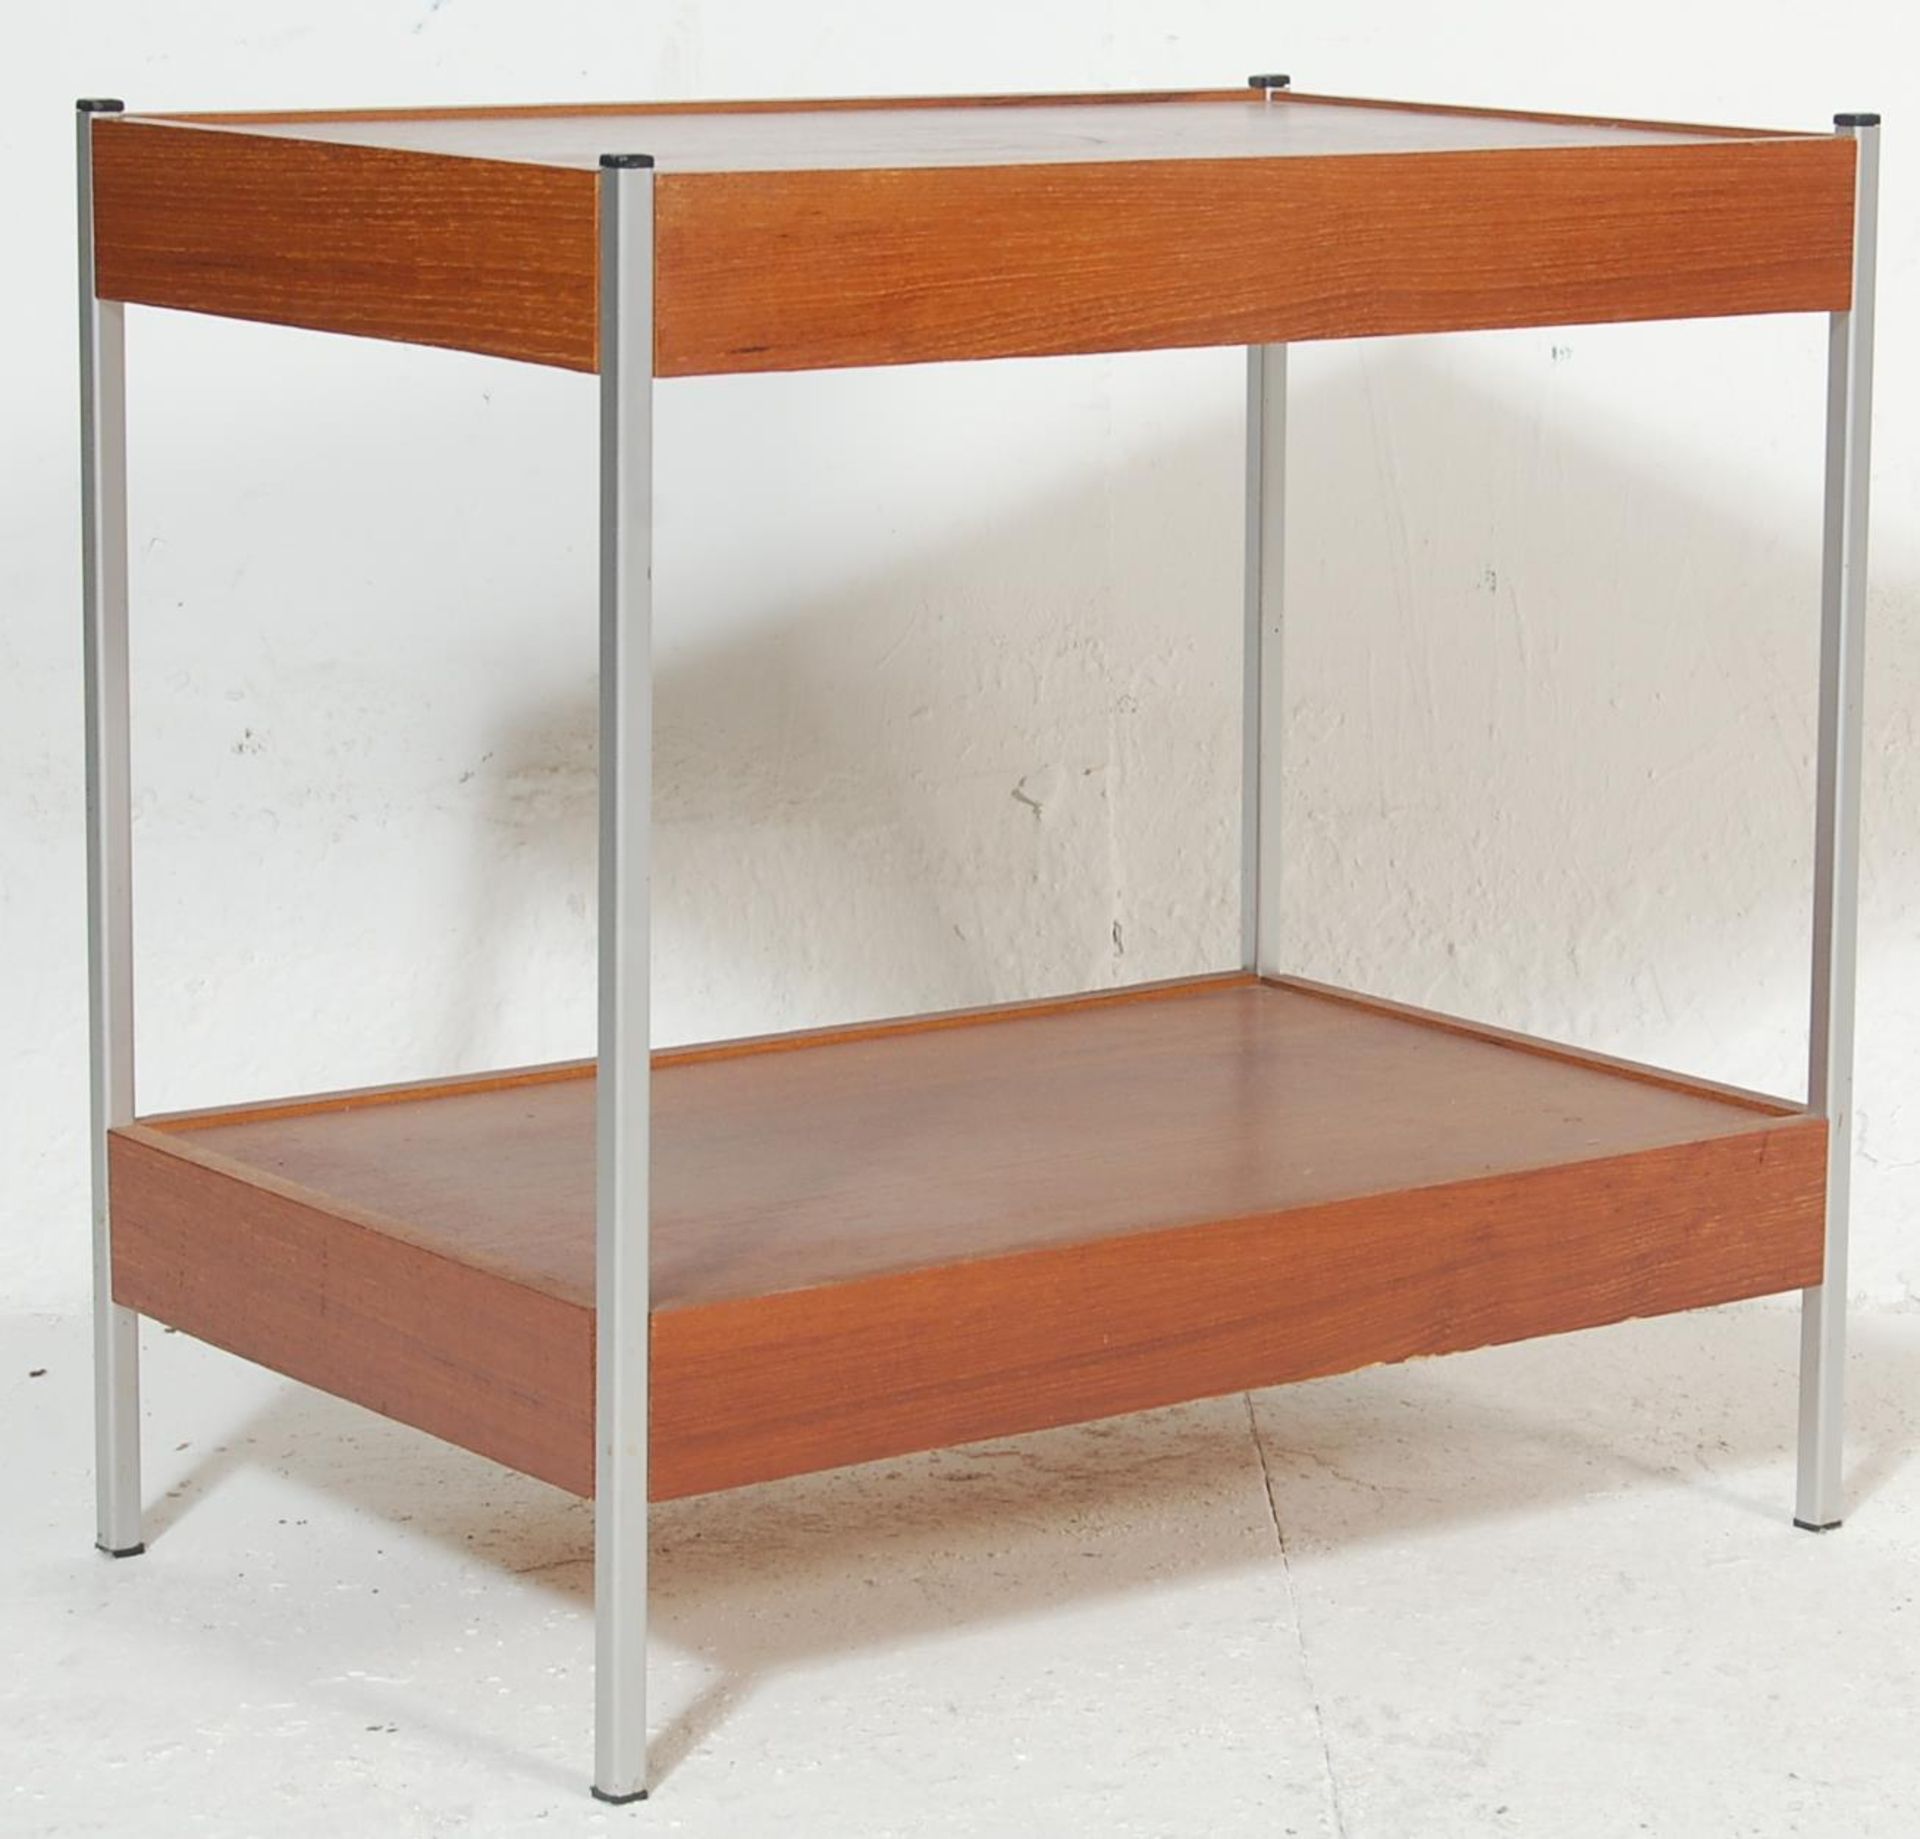 A  retro mid century, circa 1950's teak wood and chrome tea trolley table in the manner of Merrow